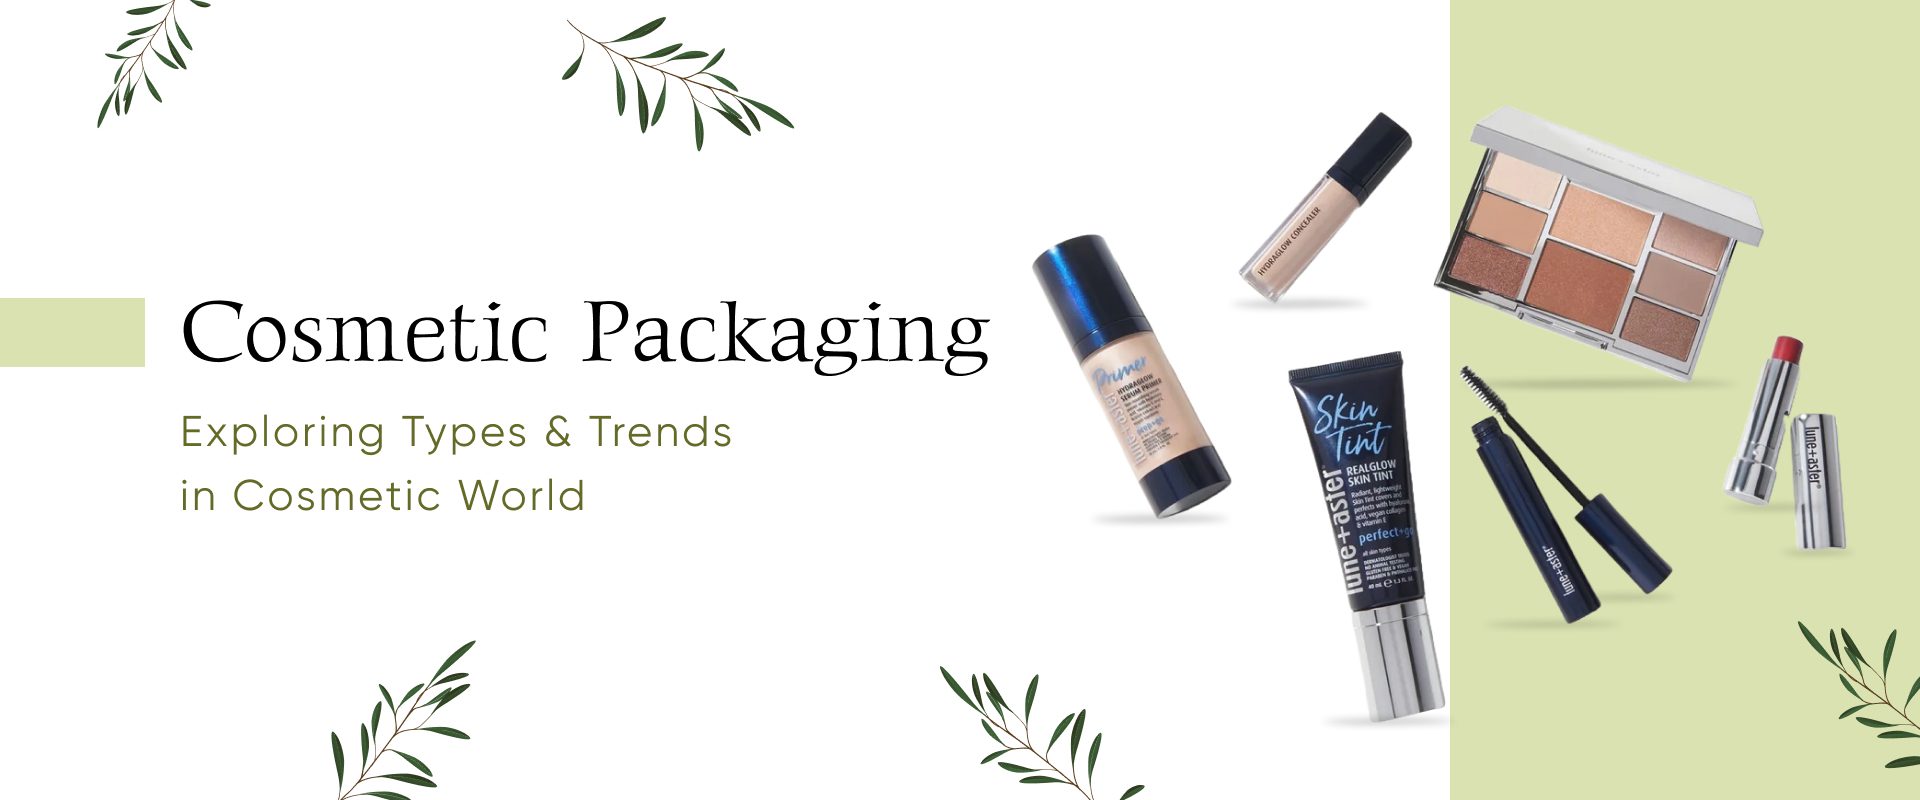 Cosmetic Packaging: Exploring Types & Trends in the Cosmetic World